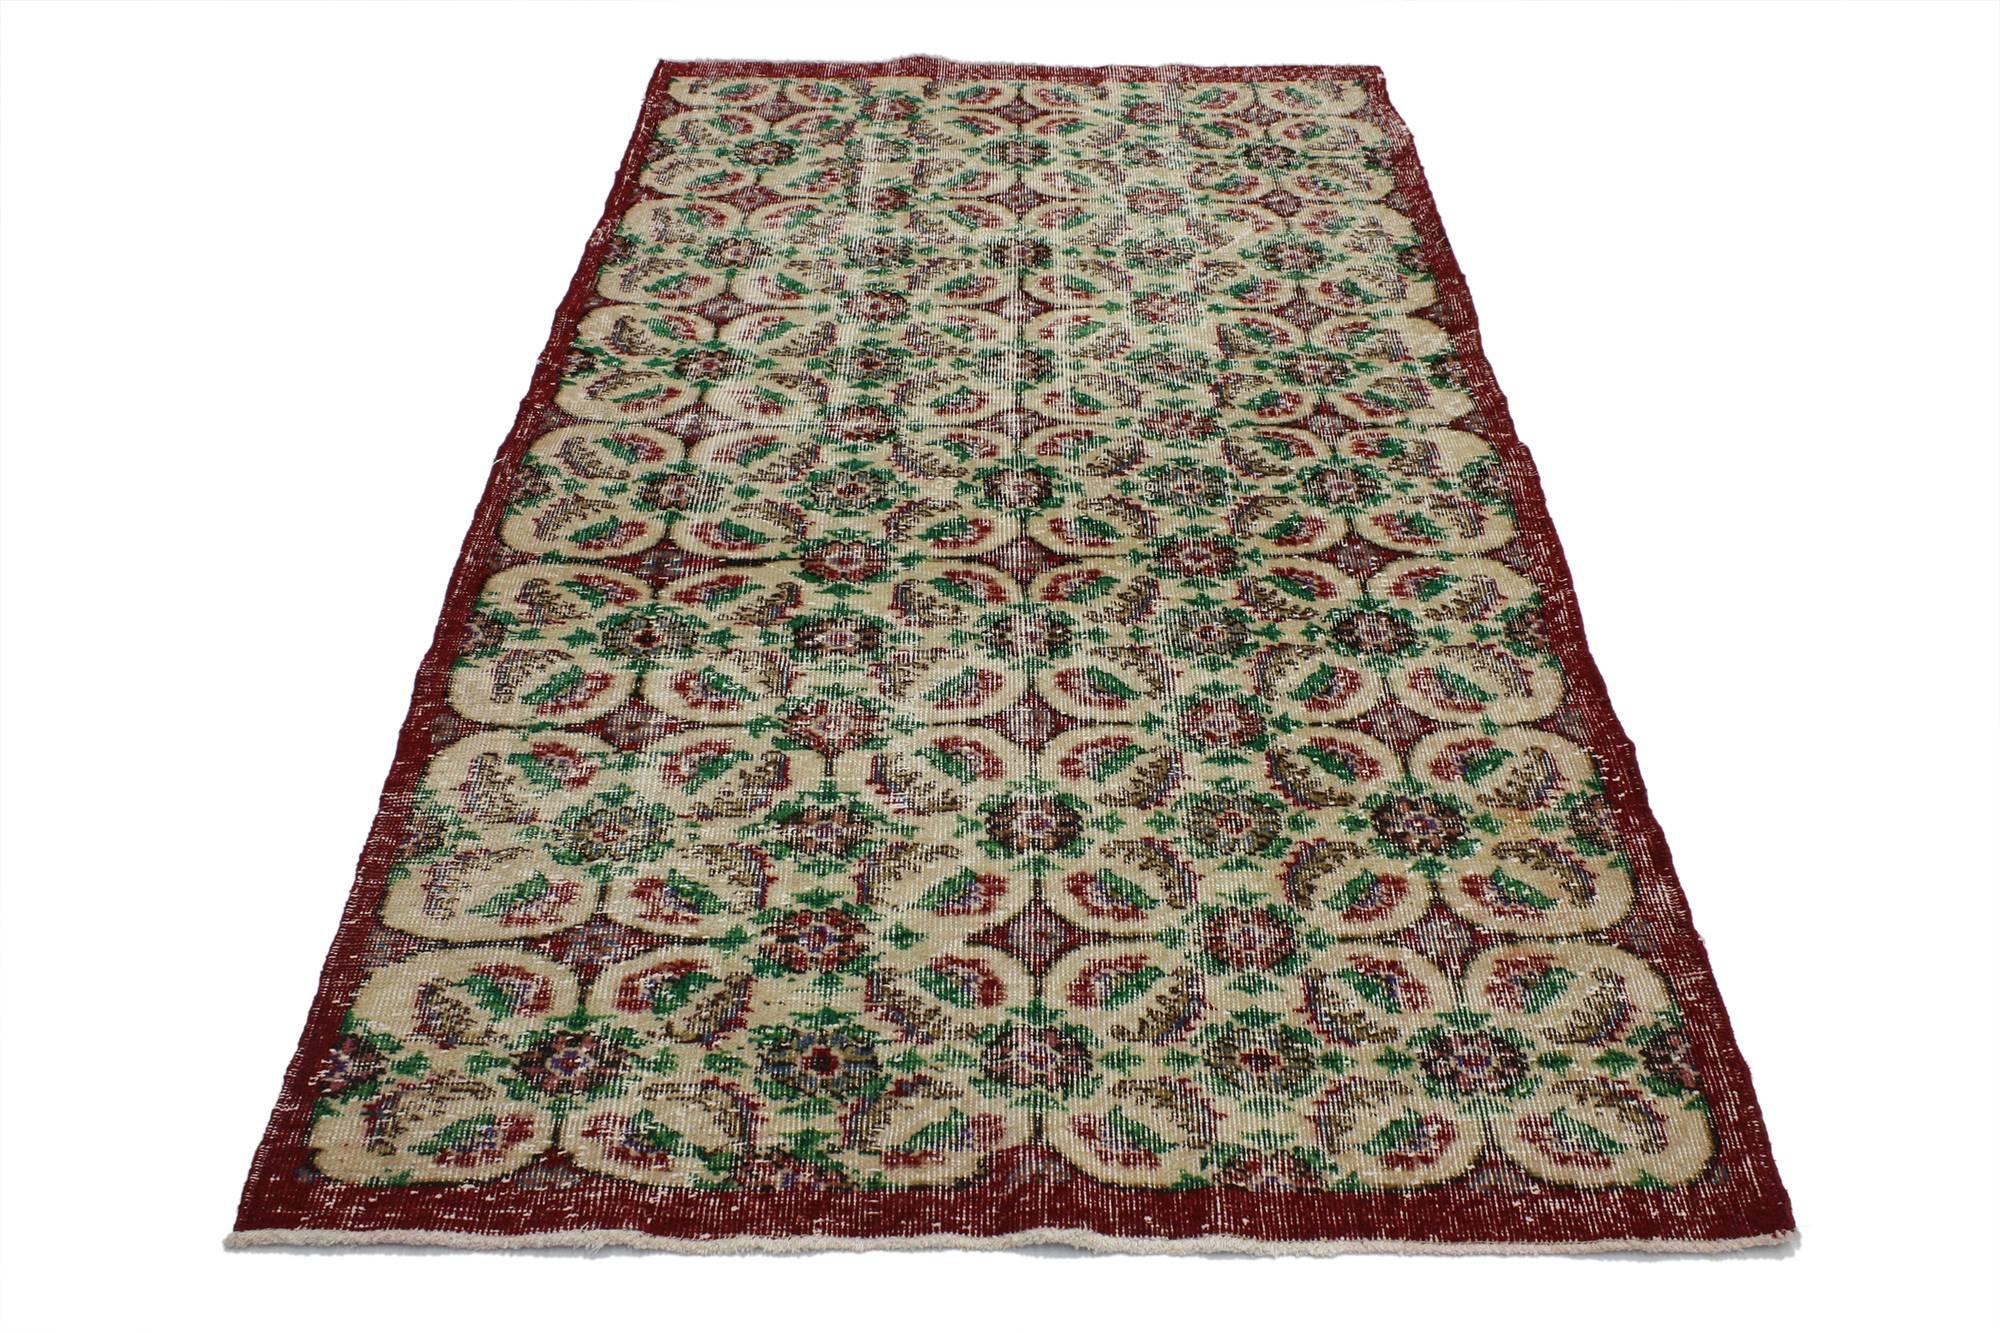 51981, Zeki Muren Vintage Turkish Rug With French Country, Swedish Farmhouse Style, 3'10 X 6'09.  This vintage Turkish Sivas rug features an all-over repeating geometric pattern of serrated leaves, feathers, floral diamonds and roundels. This